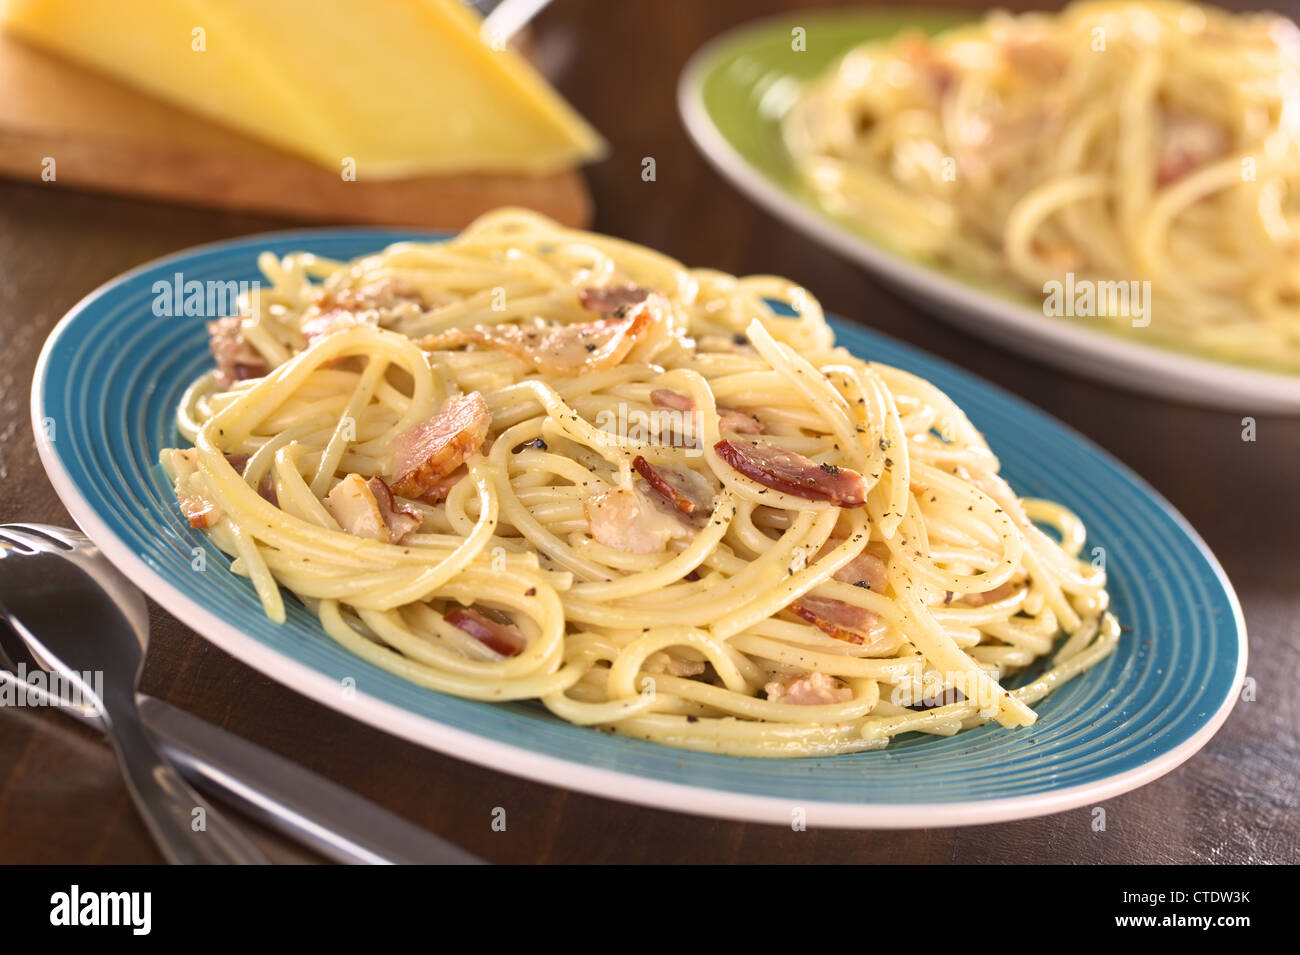 Spaghetti alla Carbonara made with bacon, eggs, cheese and black pepper (Selective Focus, Focus one third into the meal) Stock Photo